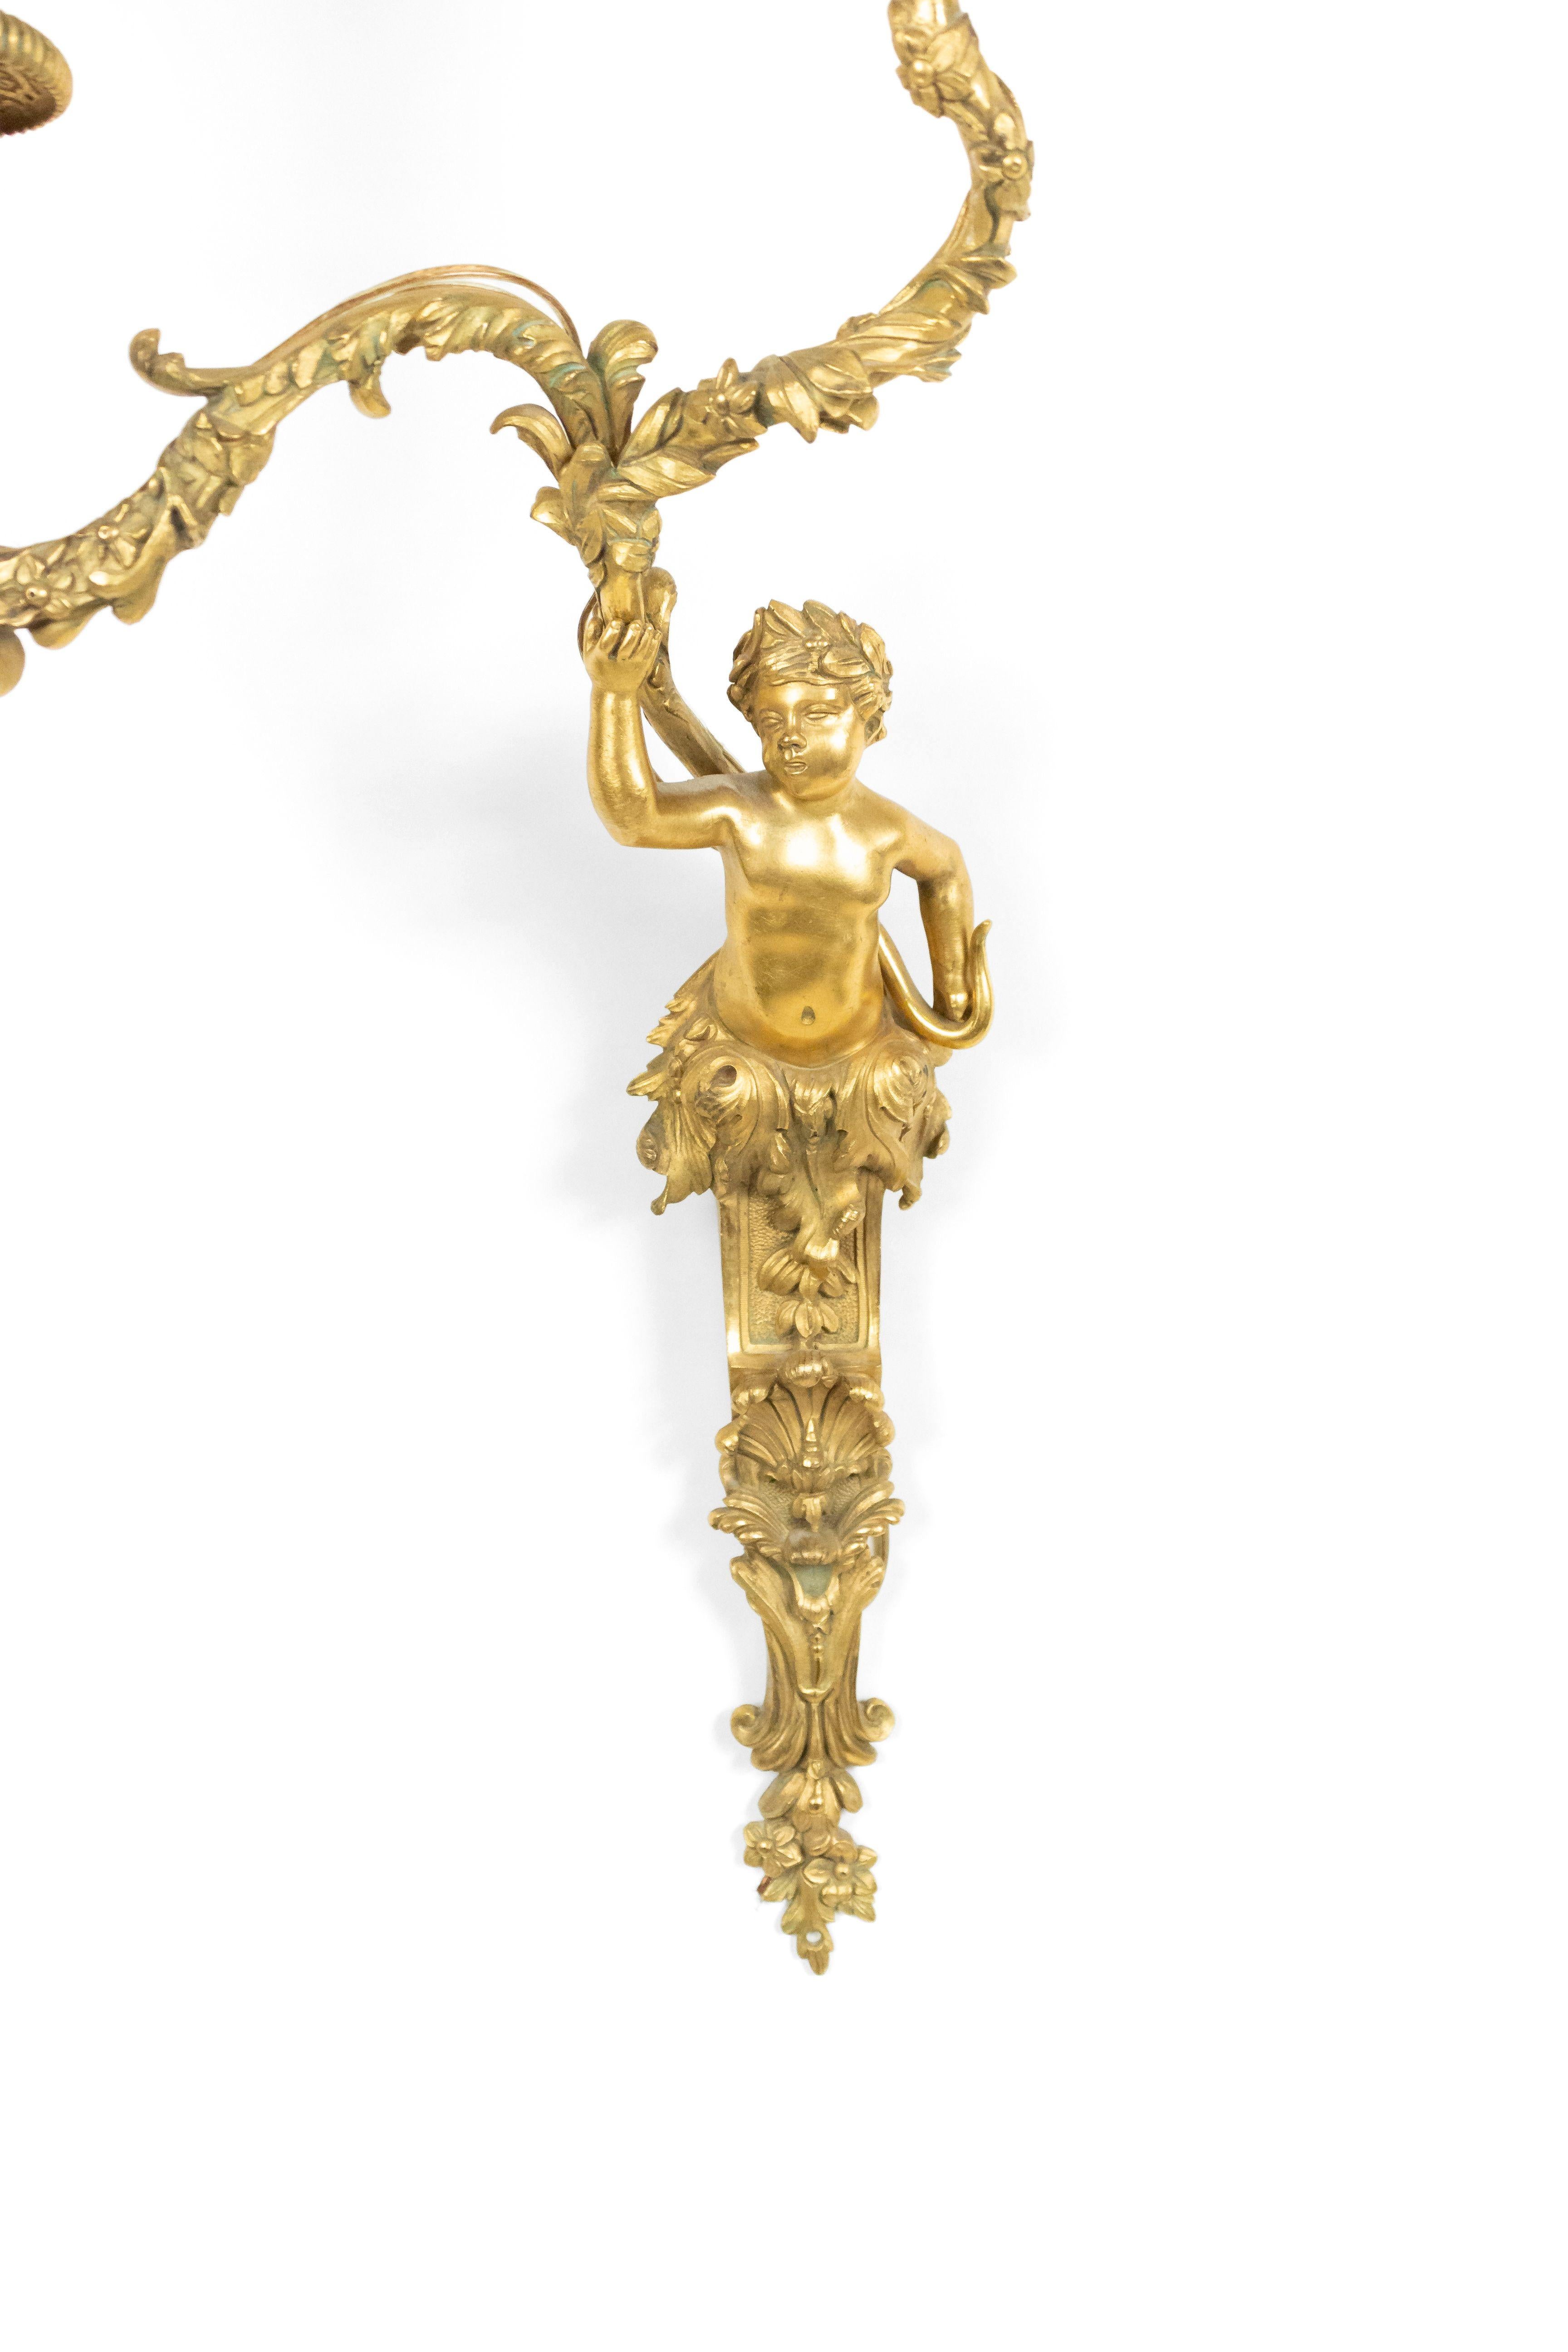 Pair of French Louis XV style 20th century bronze doré 2 arm wall sconce with cupid holding foliage decorated arms.